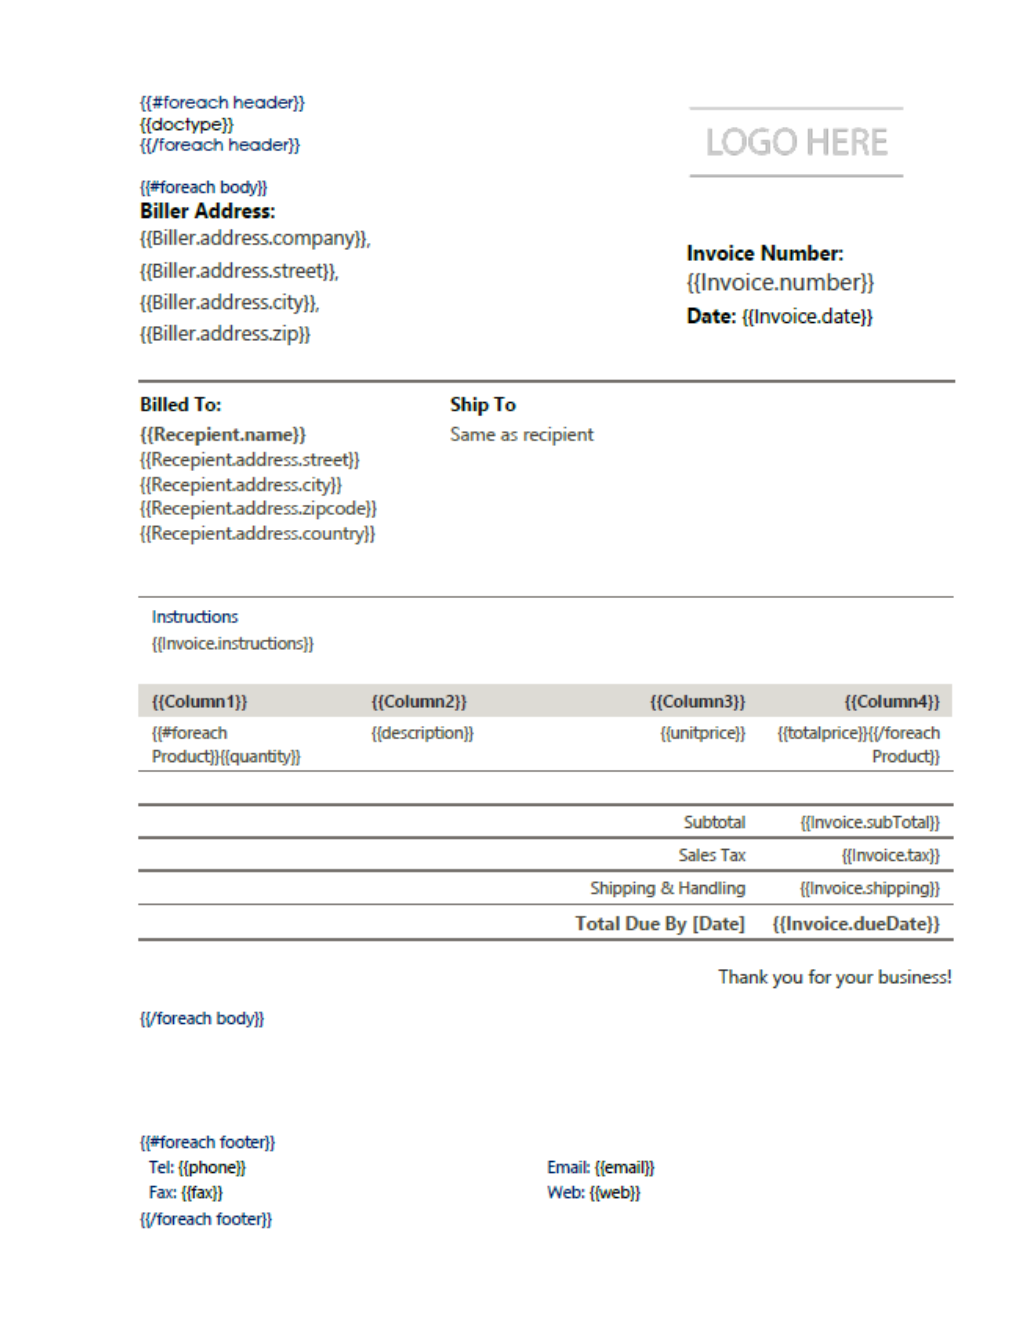 Invoice template sample for generating dynamic invoices